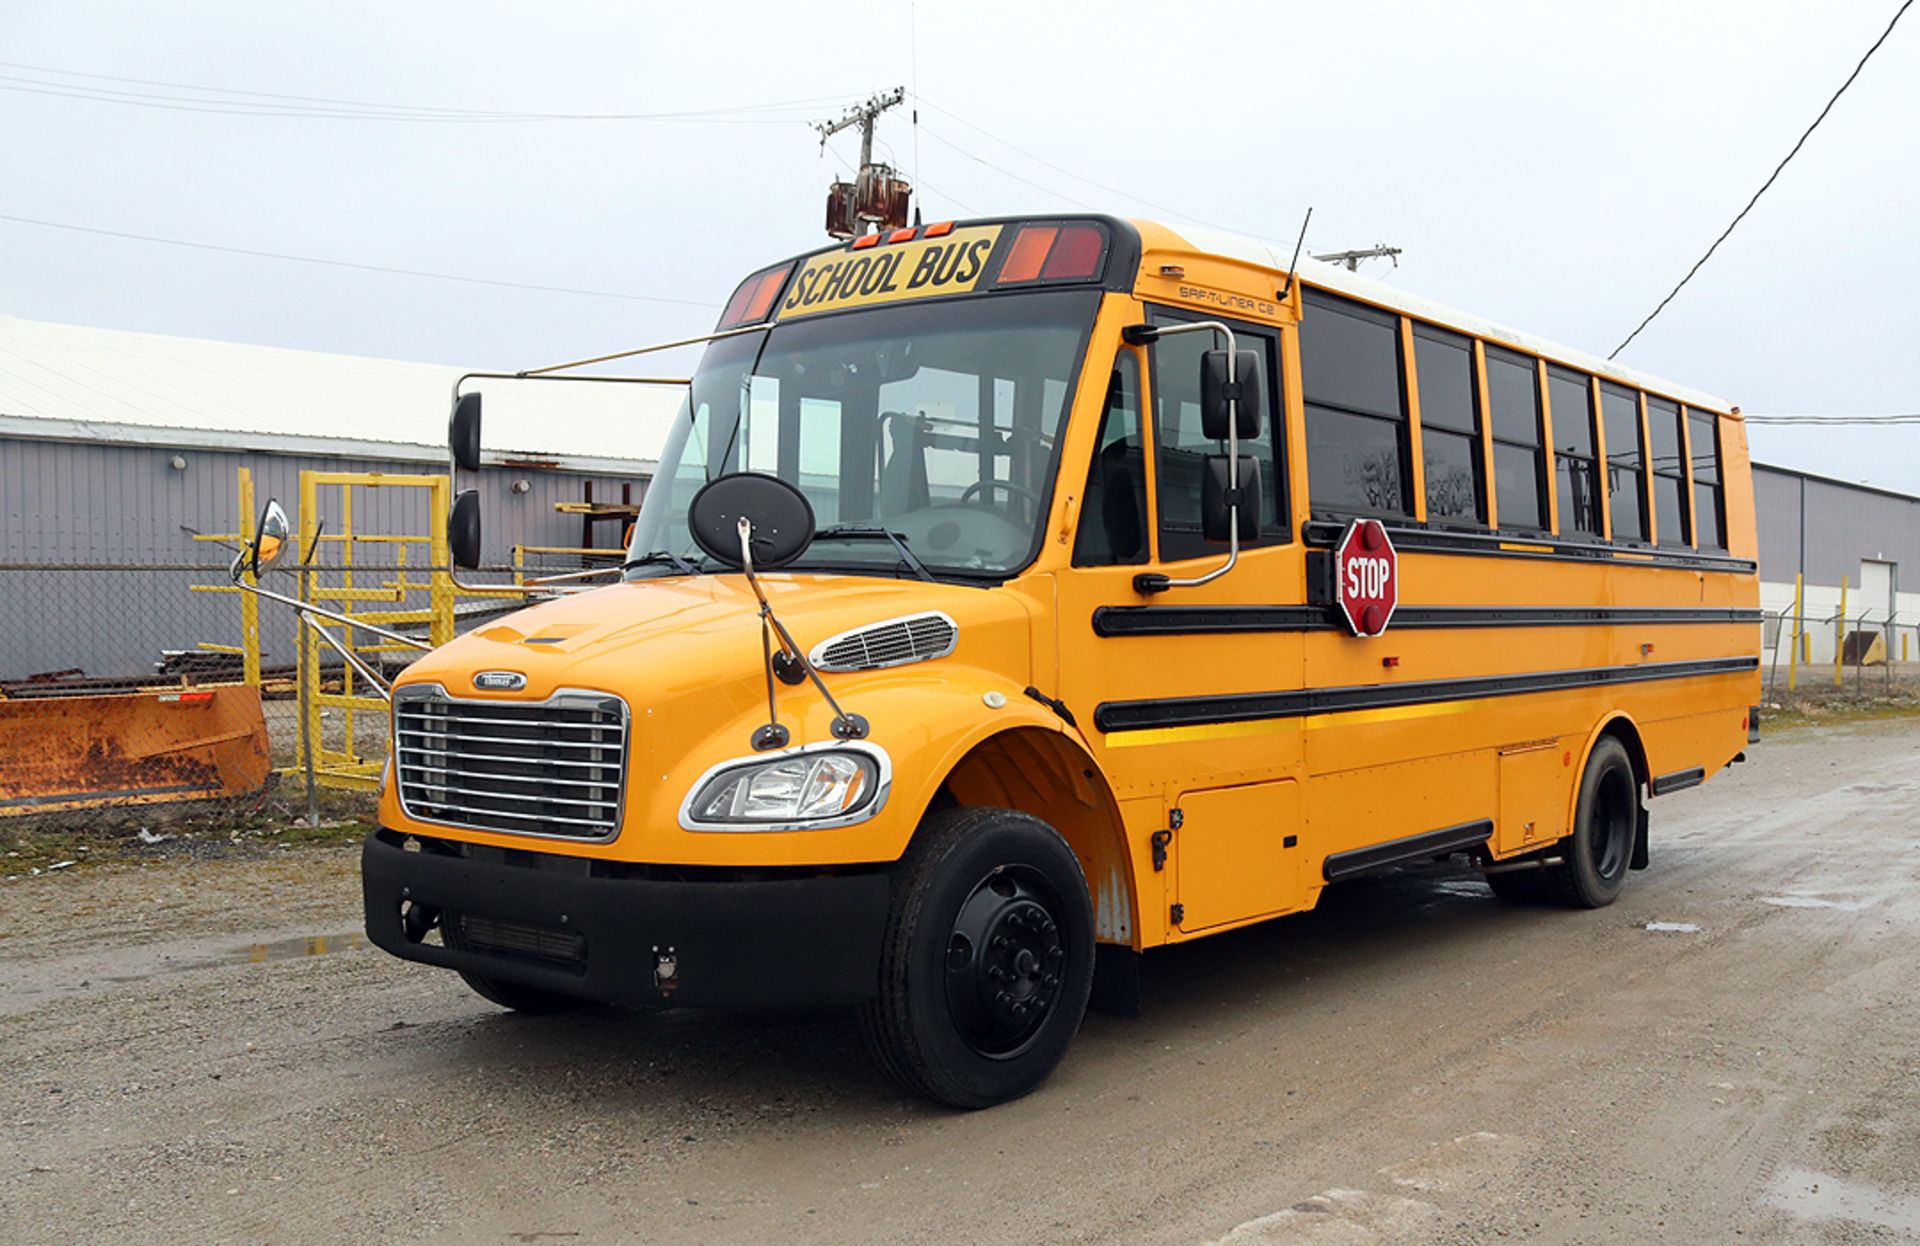 2011 Thomas C2 Saf-T-Liner School Bus on Freightliner Chassis with Braun Handicap Lift, 215,496 mile - Image 3 of 16